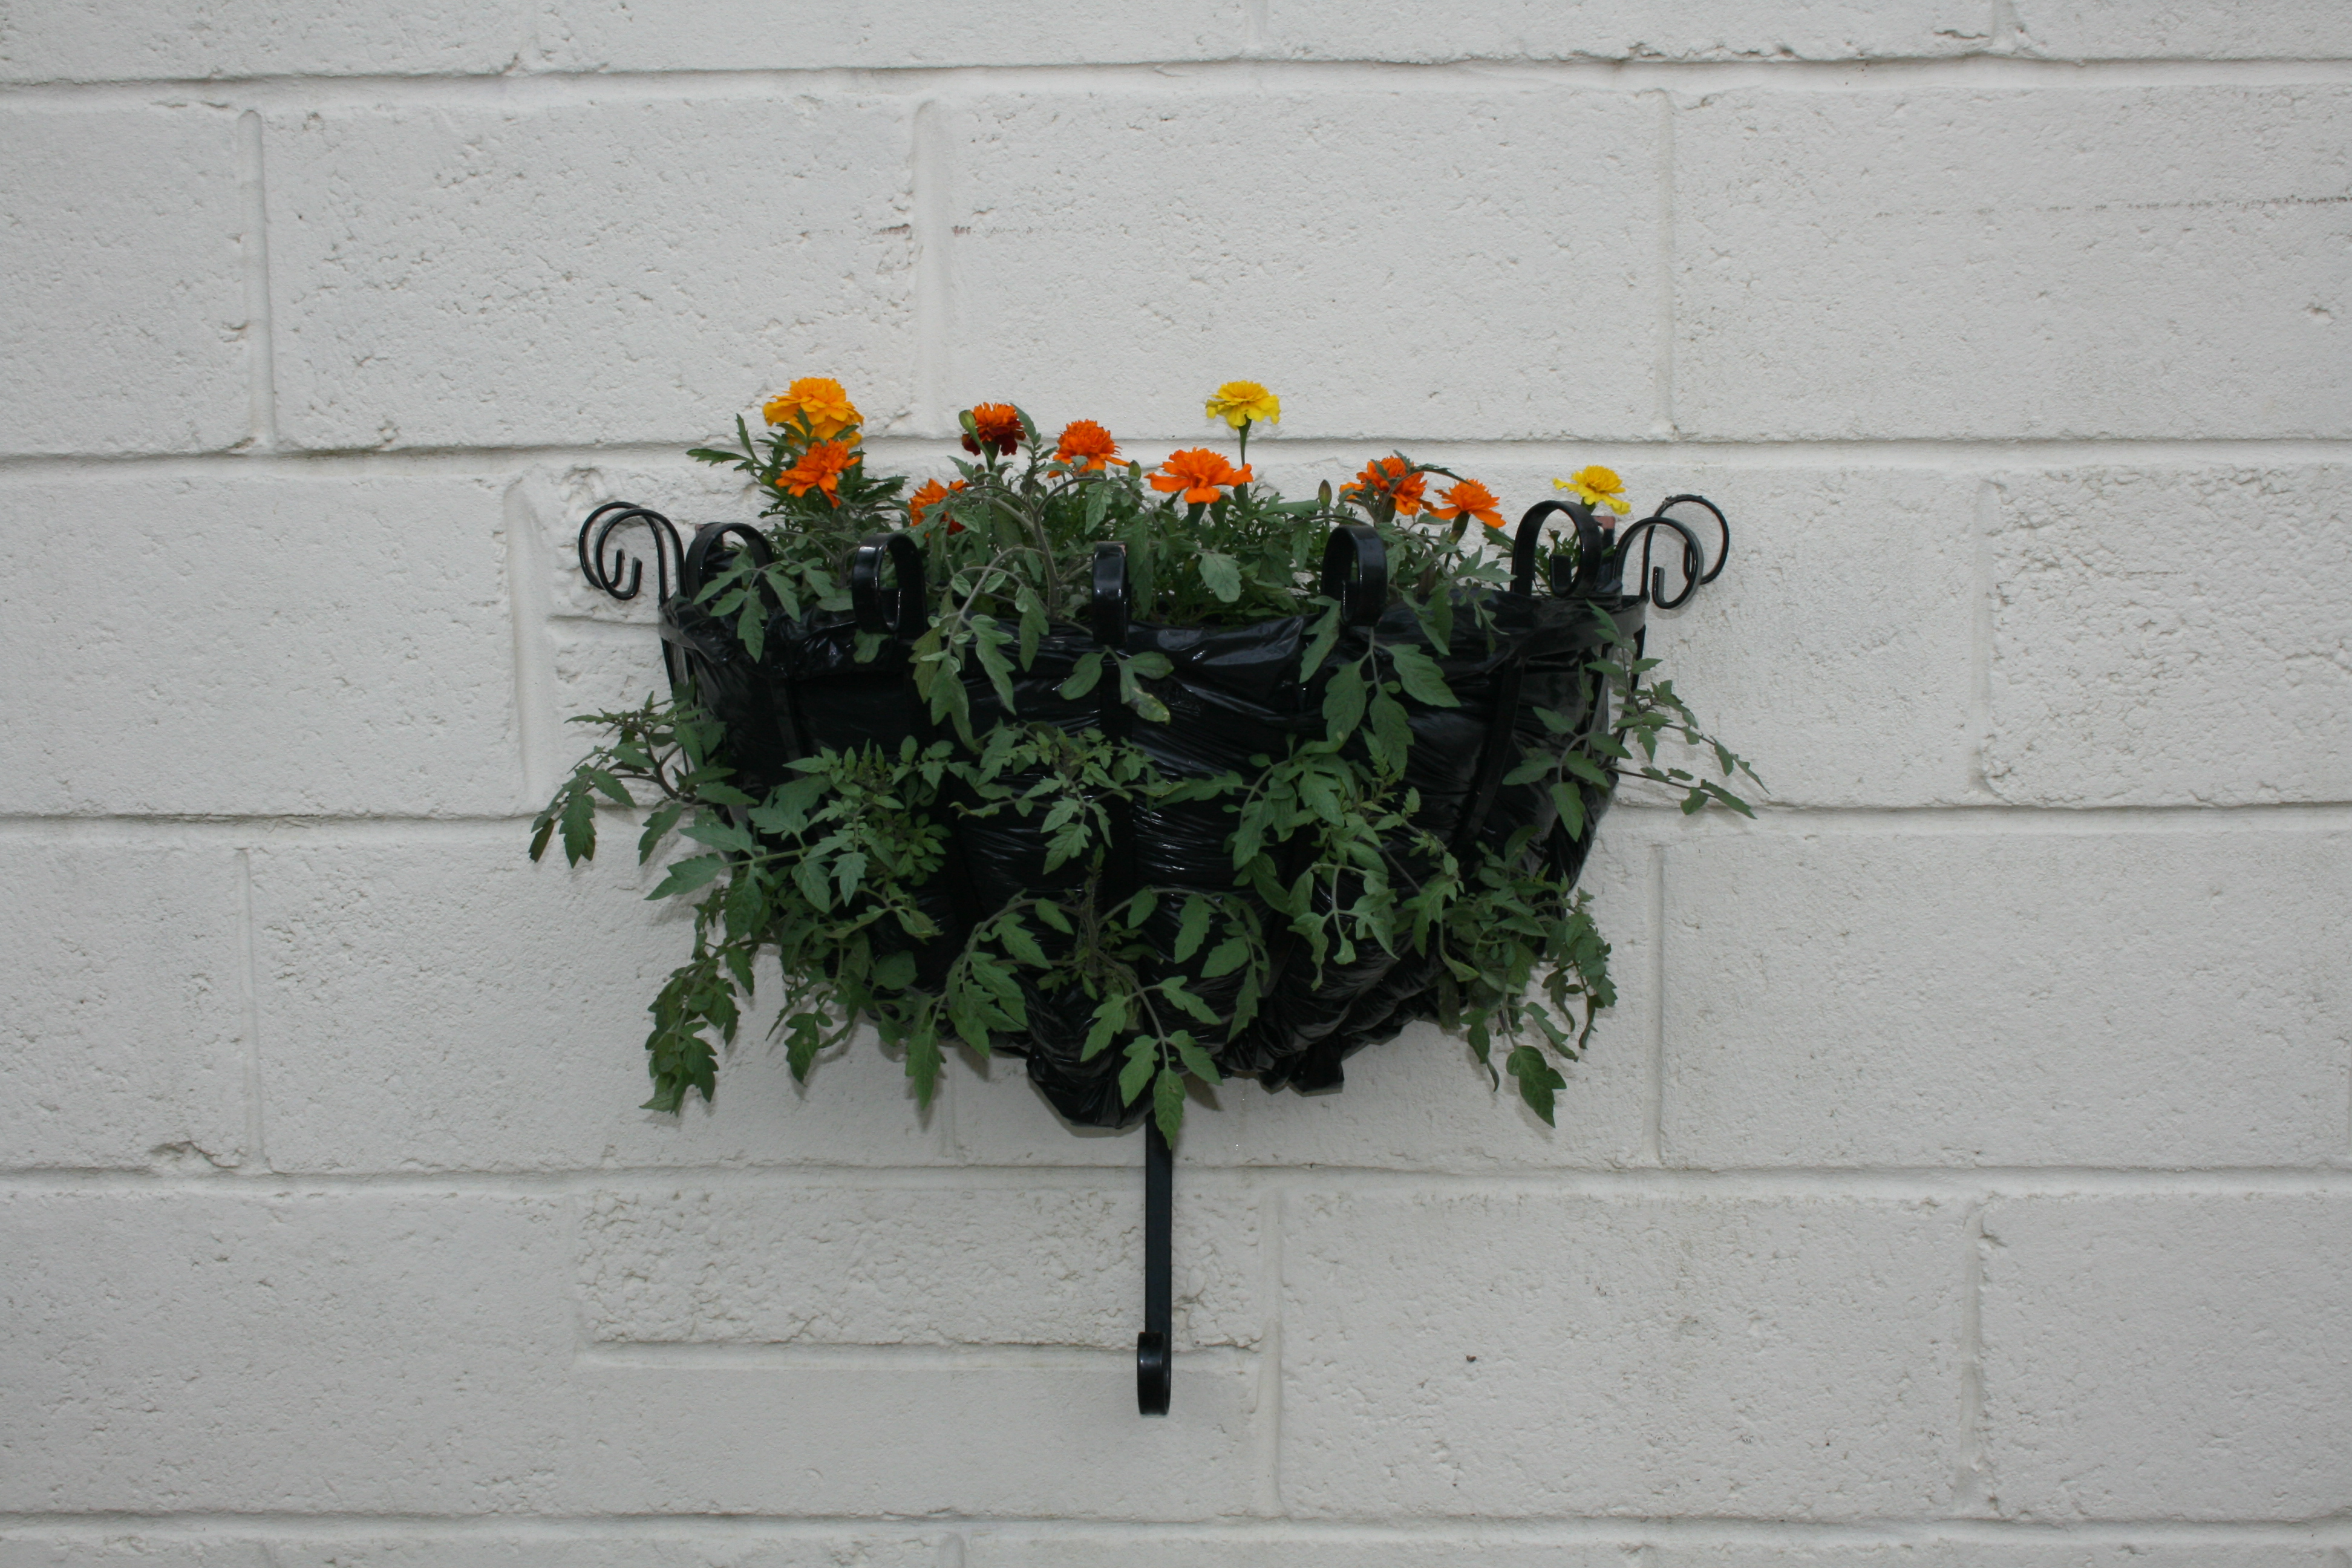 Cherrry tomatoes and marigolds in the manger